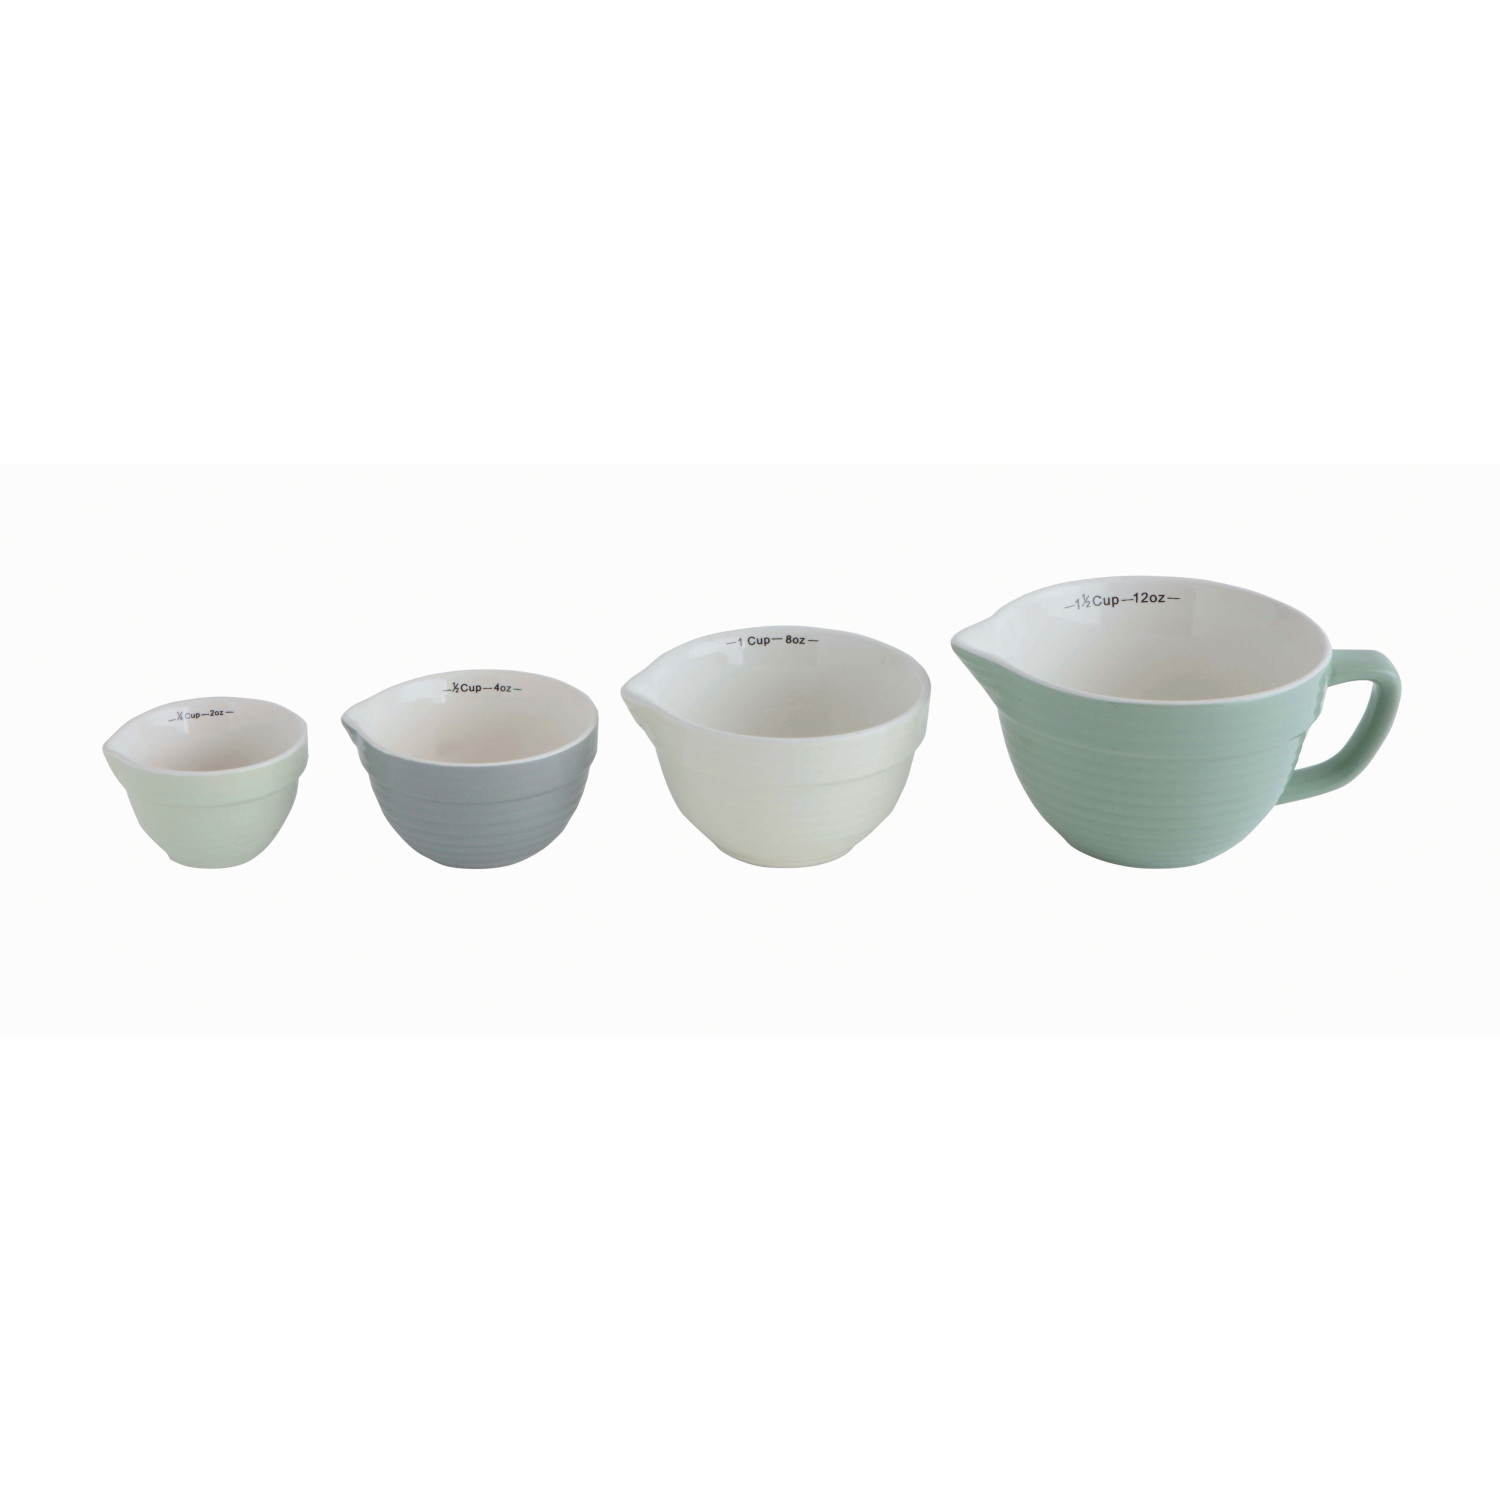 1-1/2, 1, 1/2  1/4 Cup Stoneware Batter Bowl Measuring Cups, Blue, Set of 4